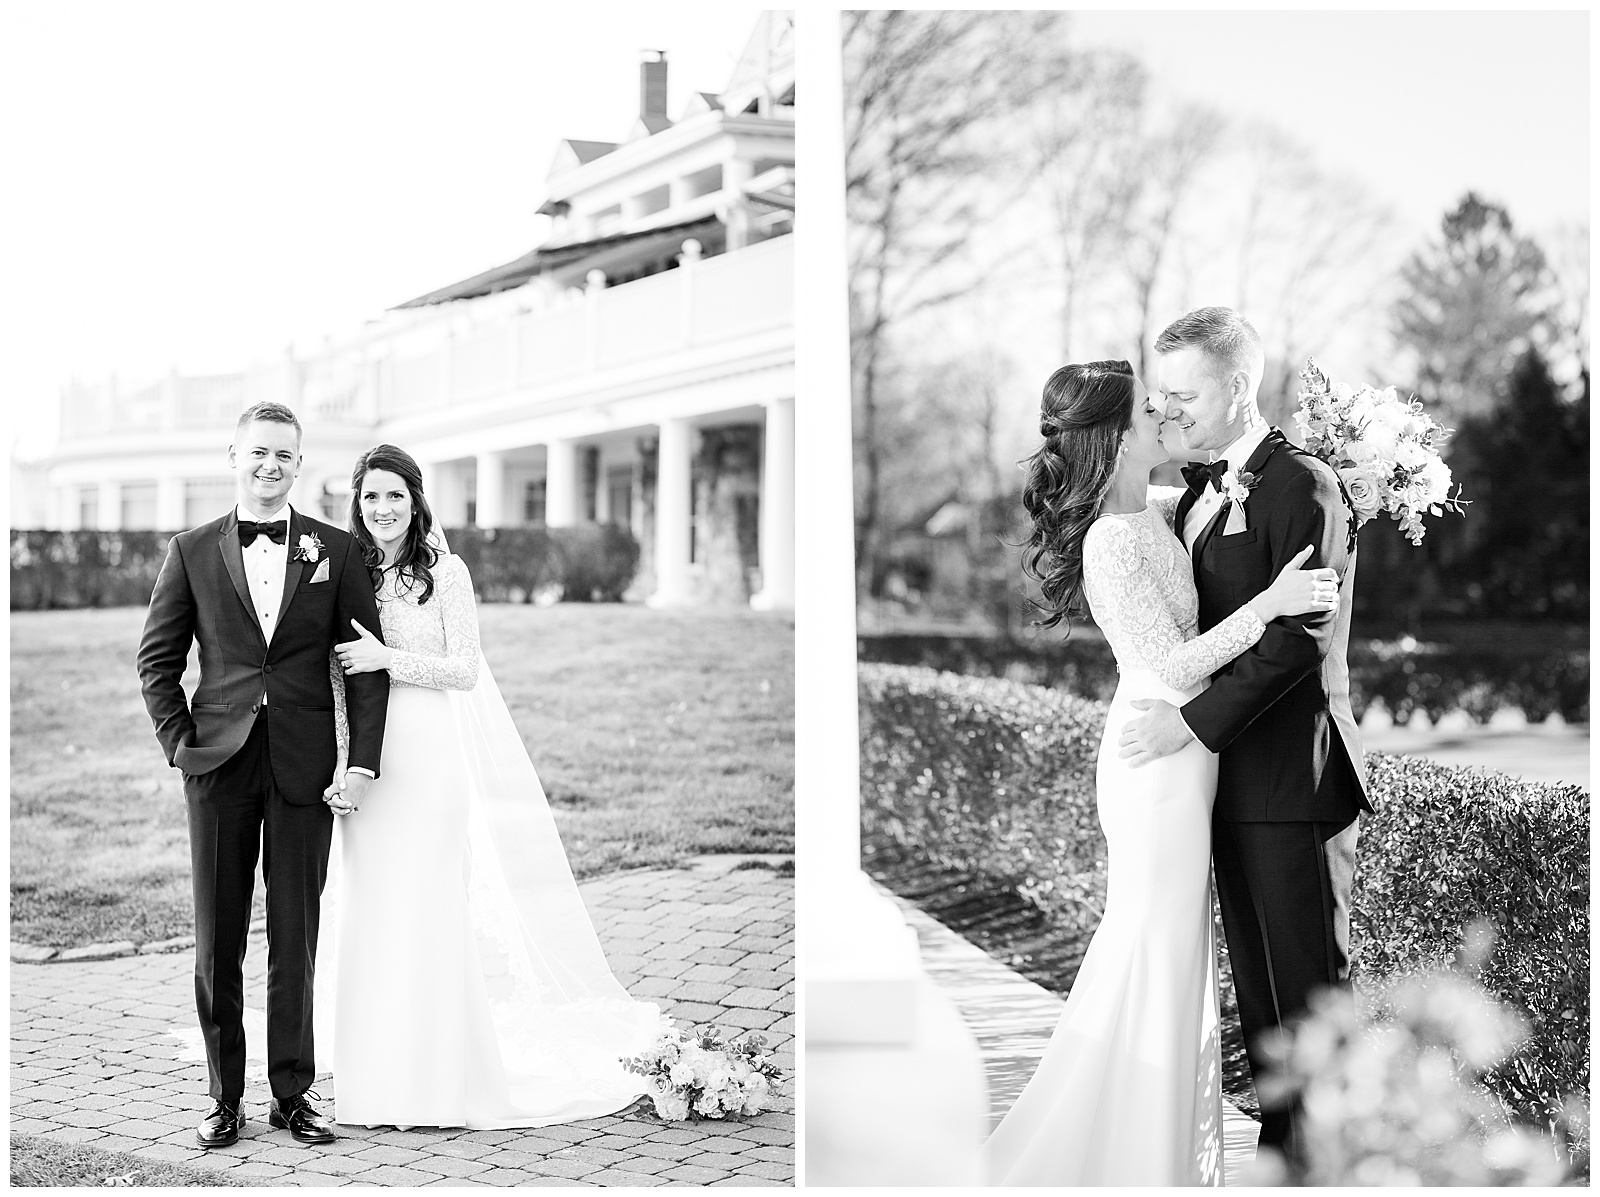 Black and white imagery of bride and groom portraits at Brae Burn Country Club